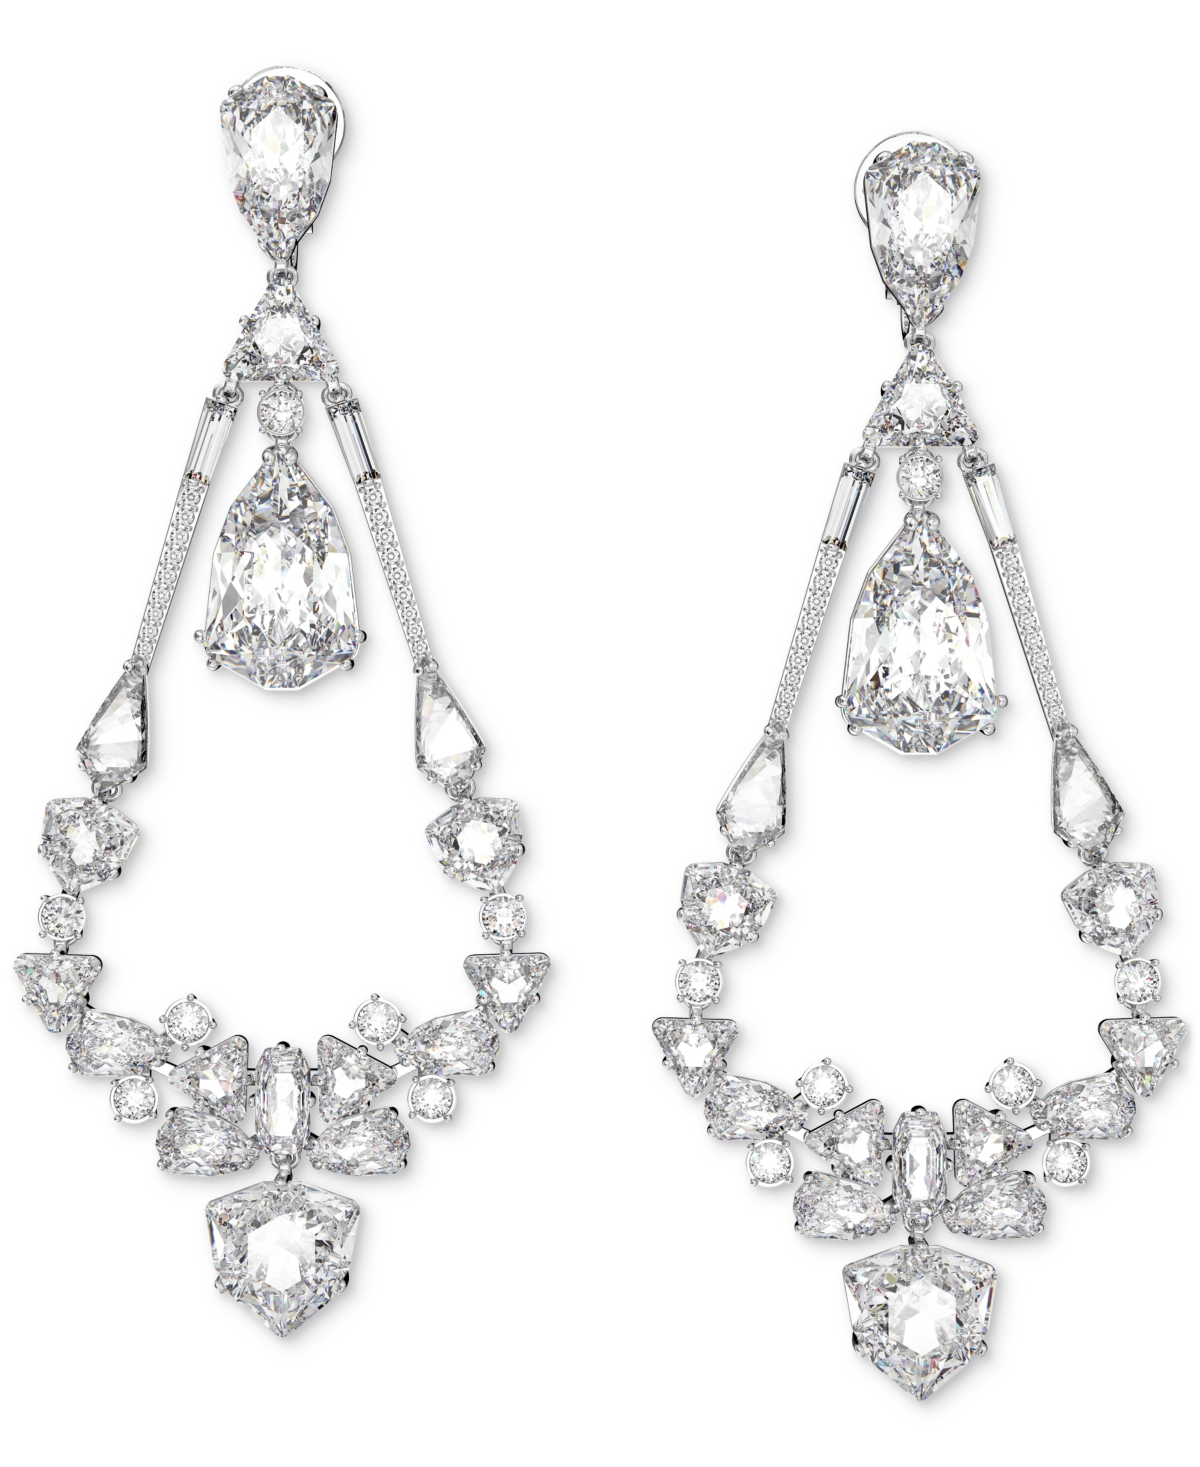 Swarovski Rhodium-plated Mixed Crystal Clip-on Chandelier Earrings In Silver